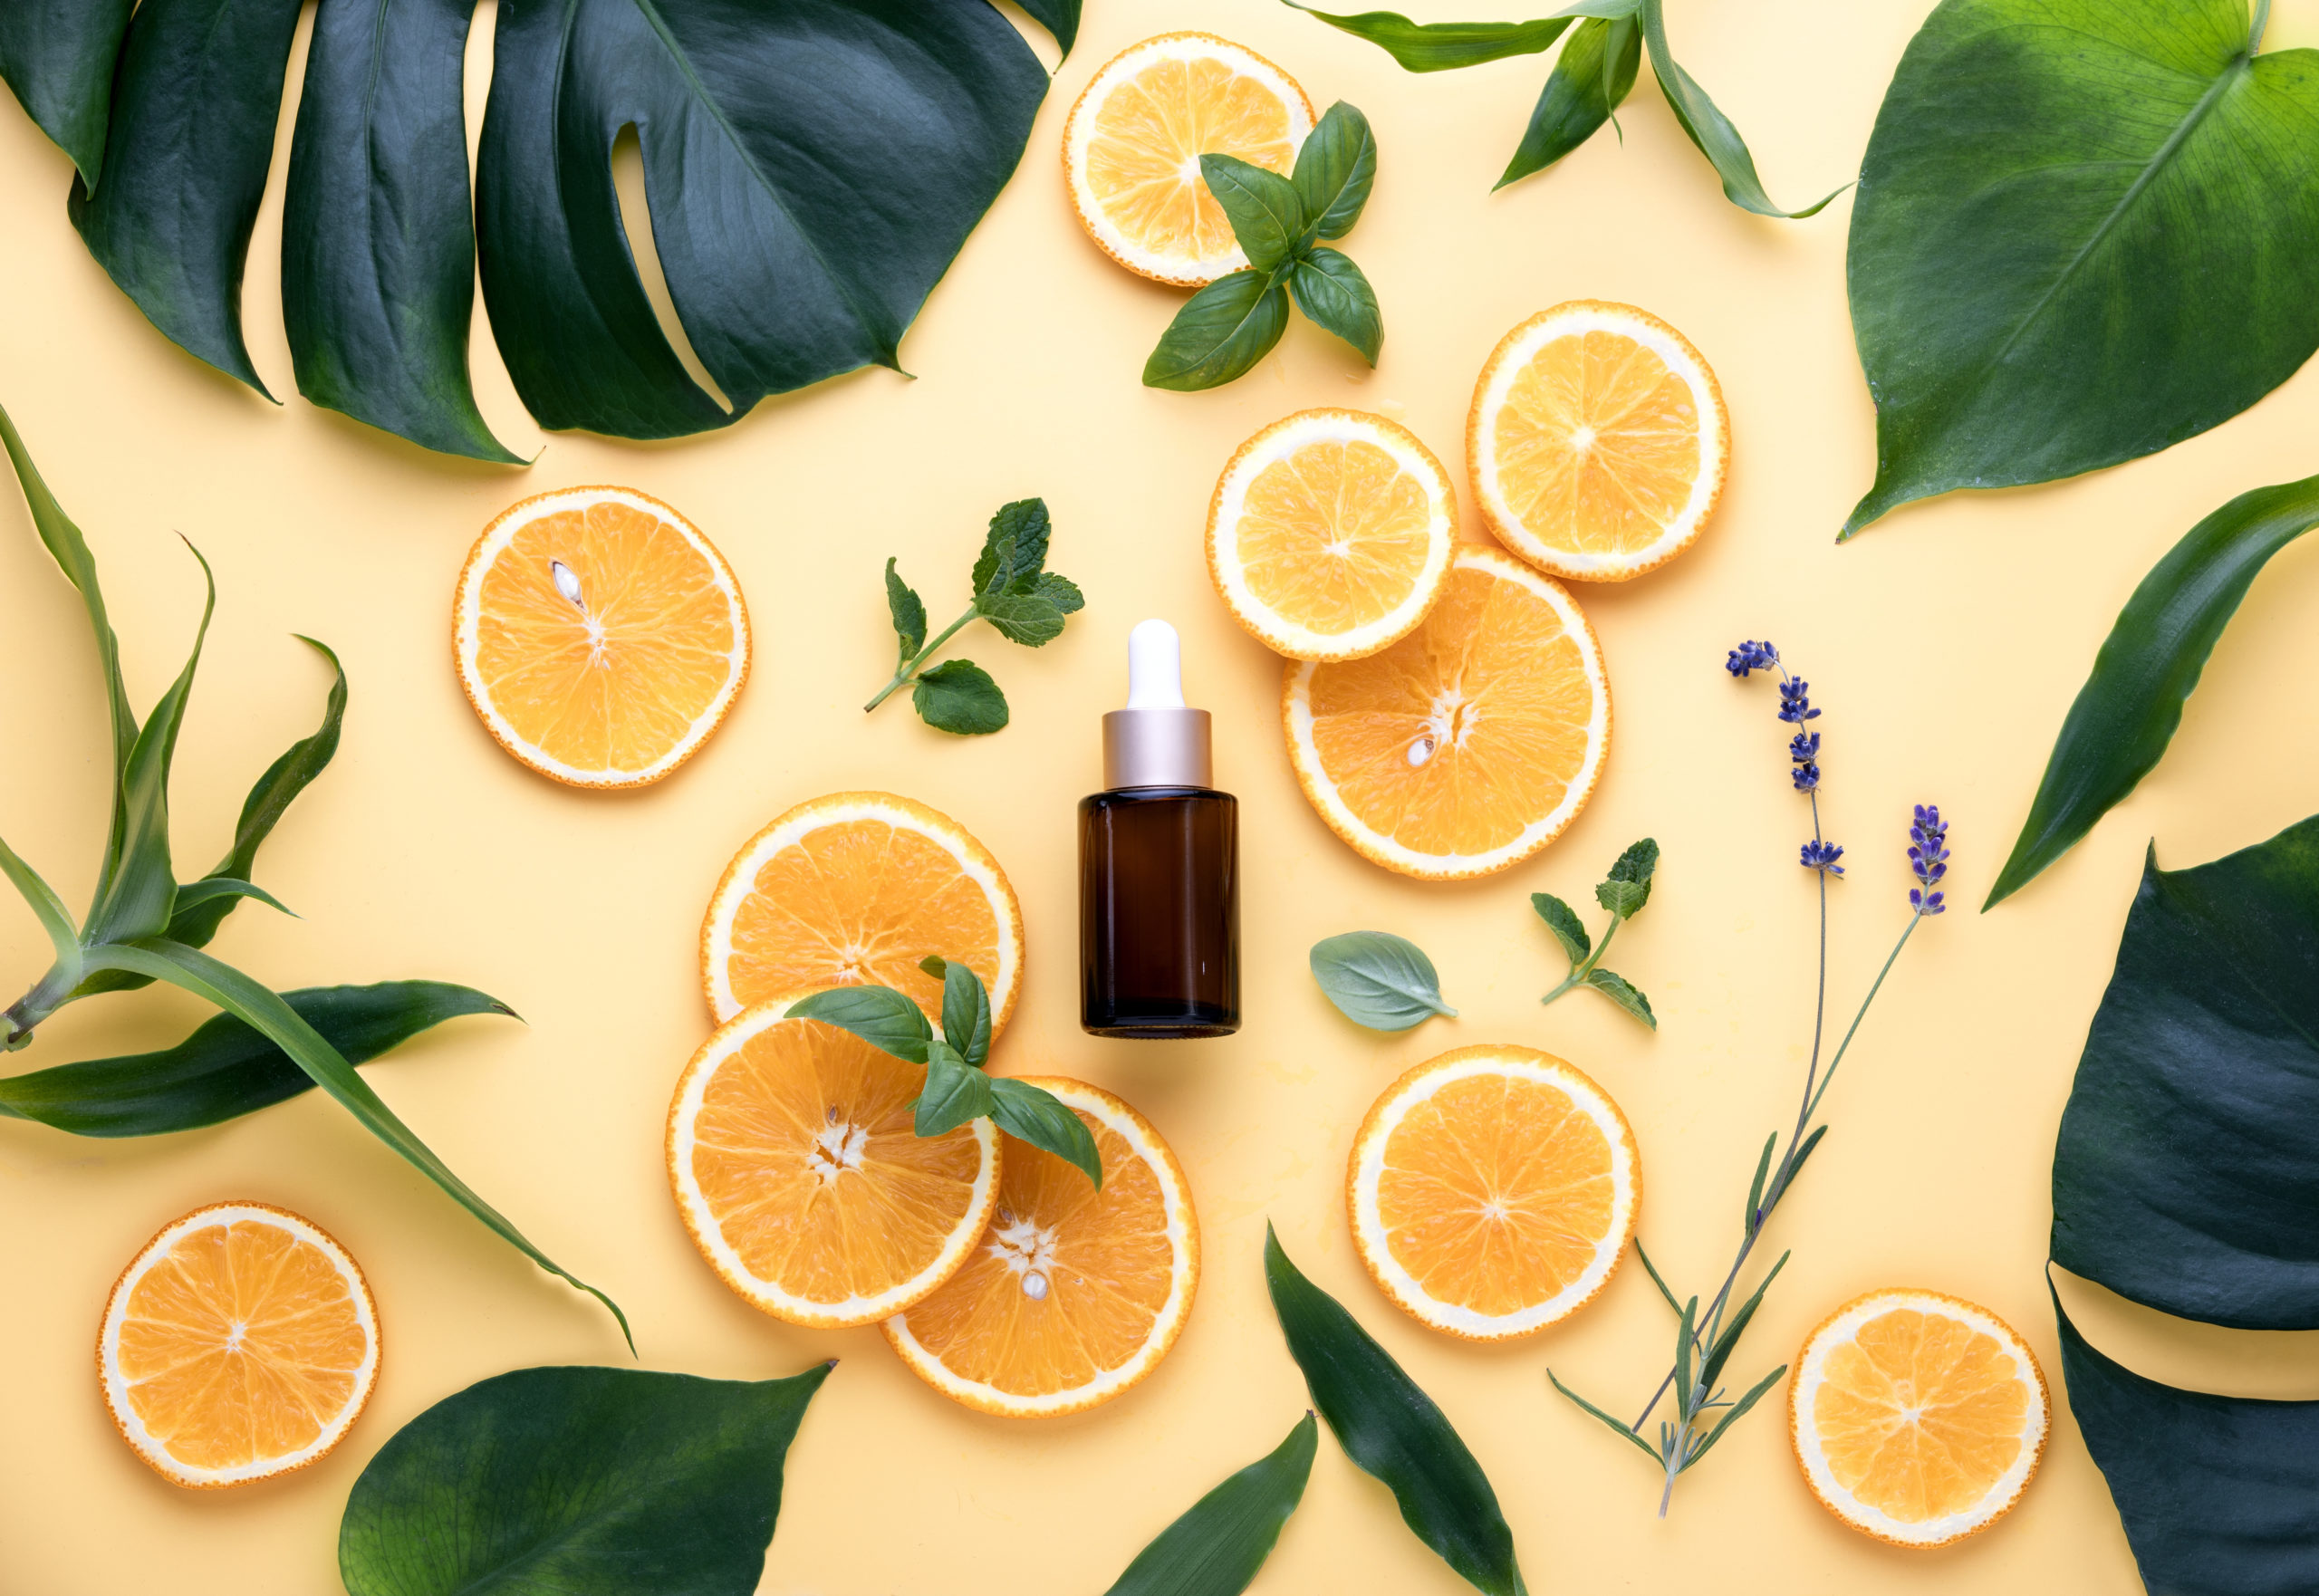 How Does A Vitamin C Product Fit Into Your Skincare Routine?